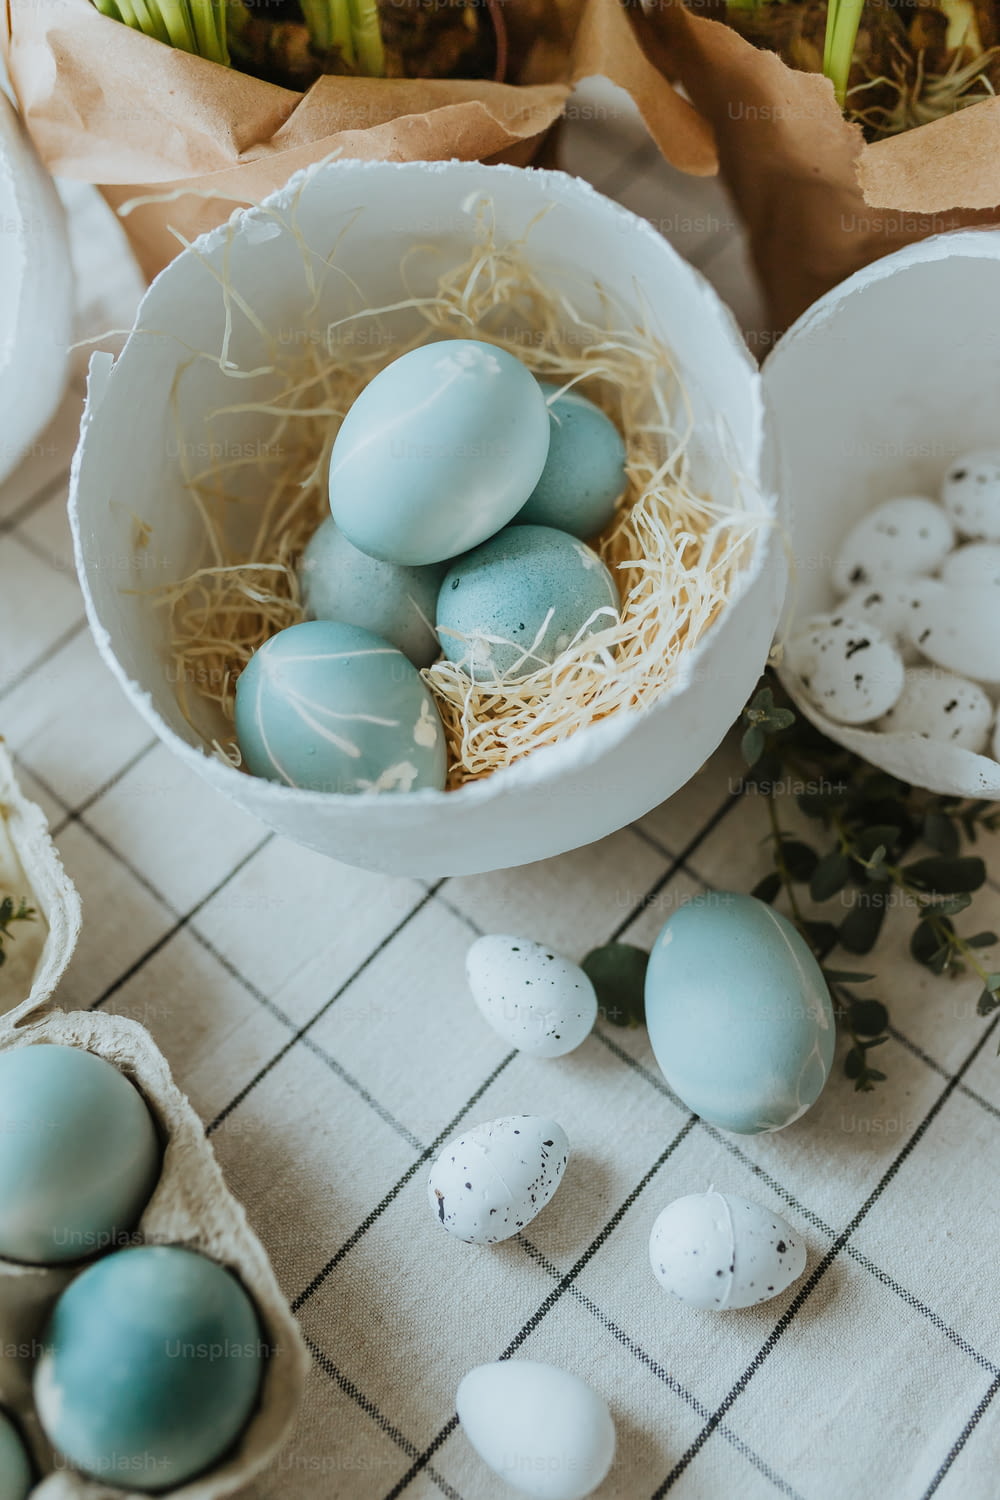 a bowl filled with blue and white eggs on top of a table